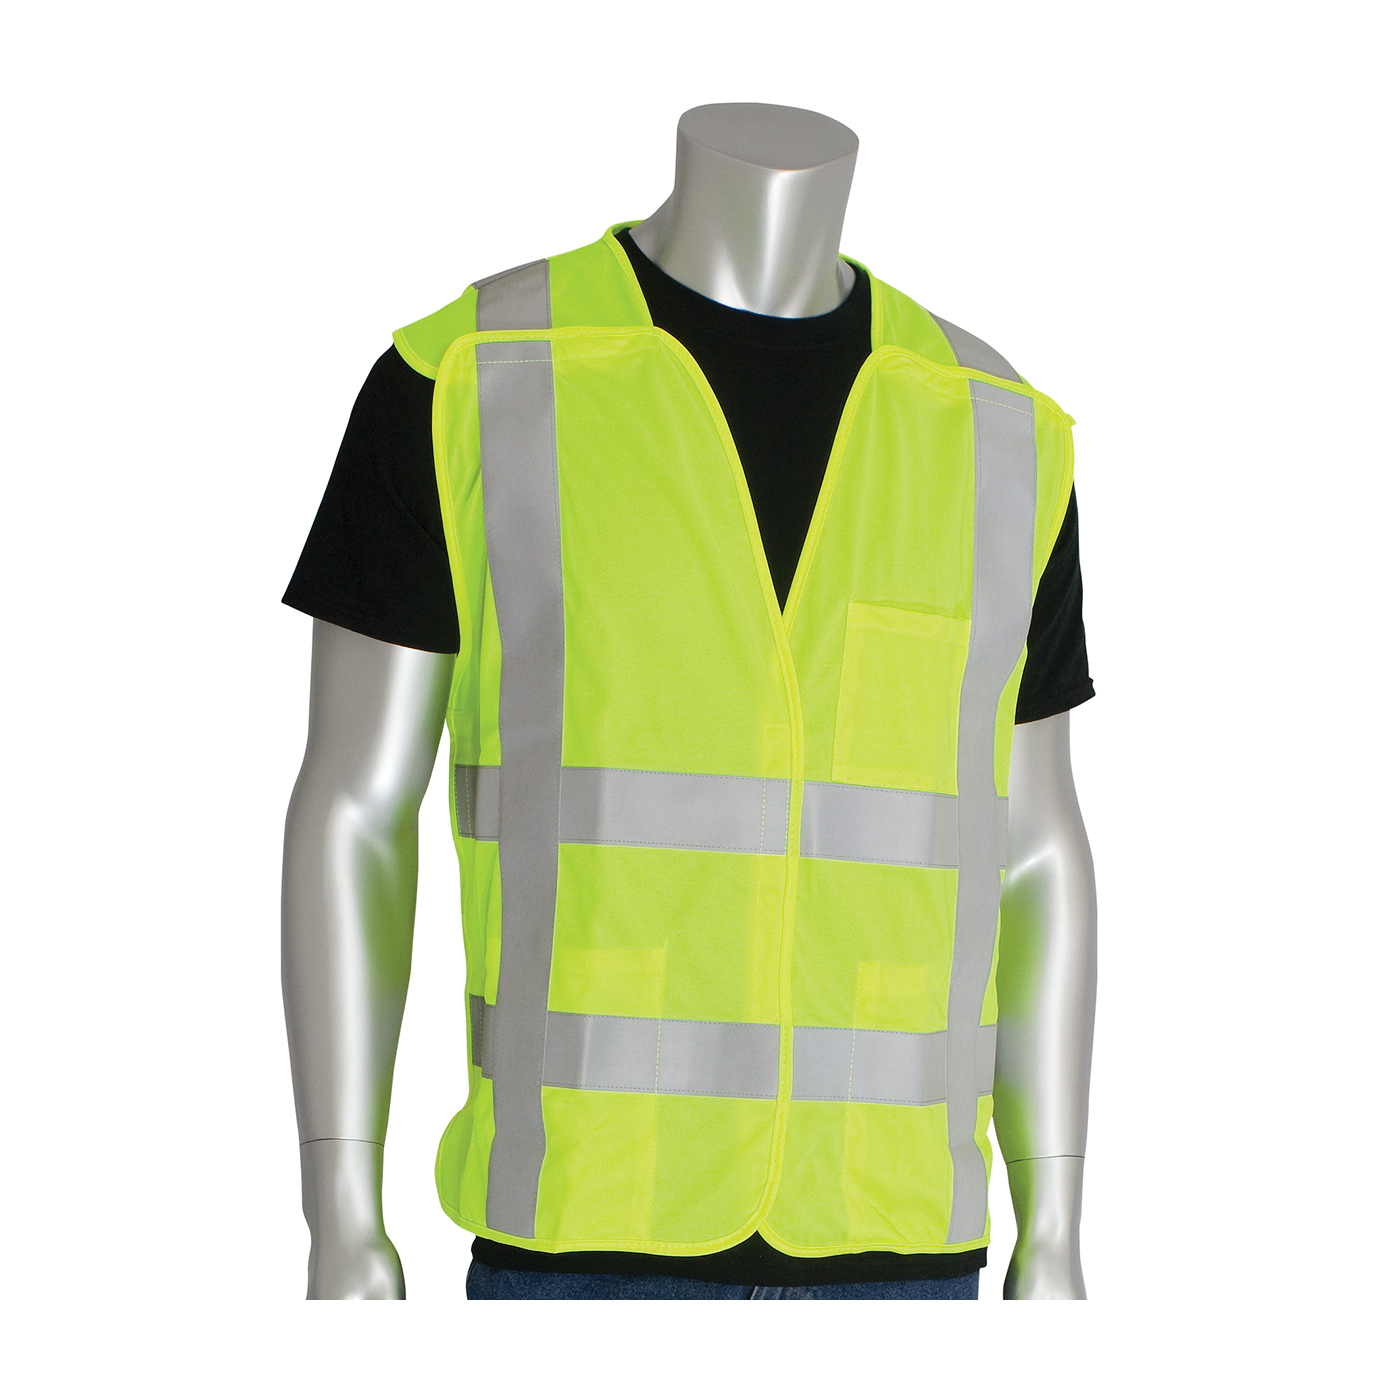 PIP® SafetyGear 305-5PVFRLY-L/XL FR Treated Solid Vest, L to XL, Hi-Viz Yellow, Polyester, Hook and Loop Closure, ANSI Class: Class 2, ANSI/ISEA 107